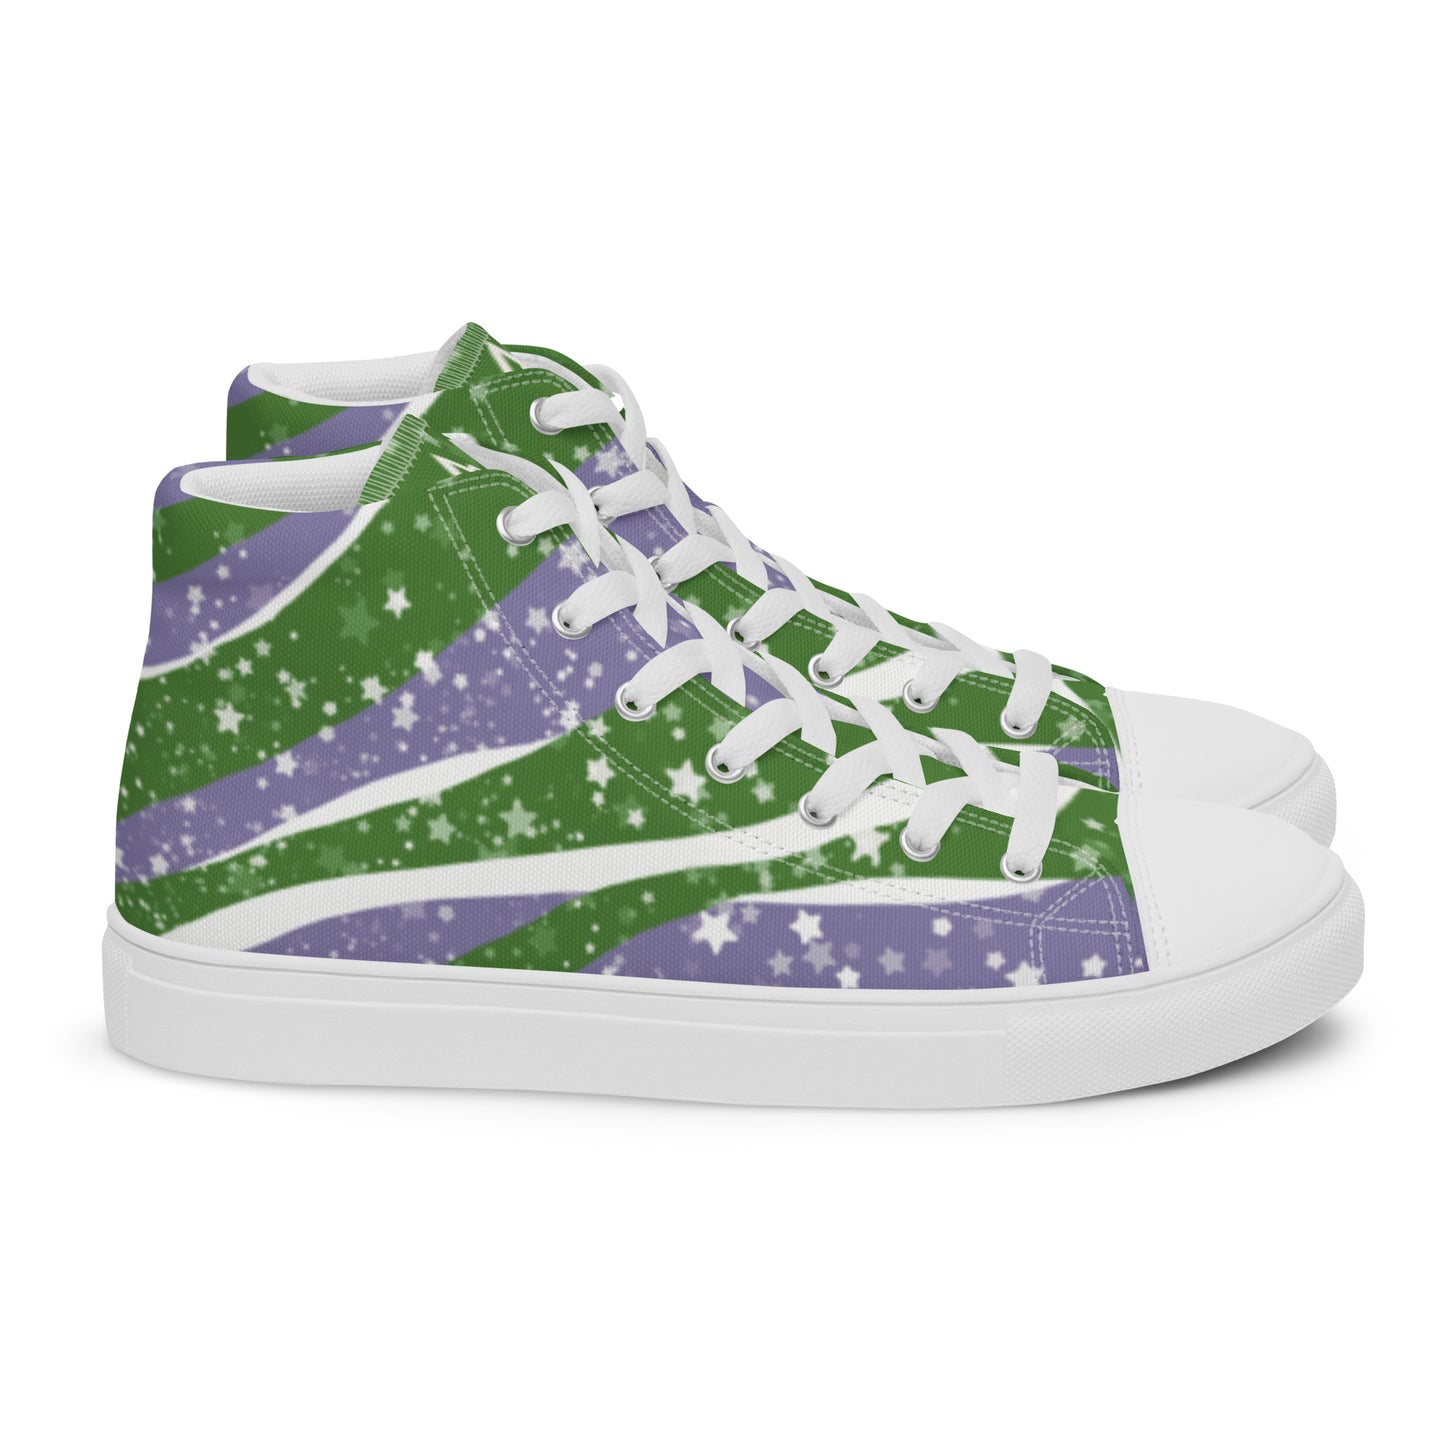 Right view: a pair of high top shoes with green, purple, and white ribbons that get larger from heel to laces, white stars, and the Aras Sivad logo on the tongue.